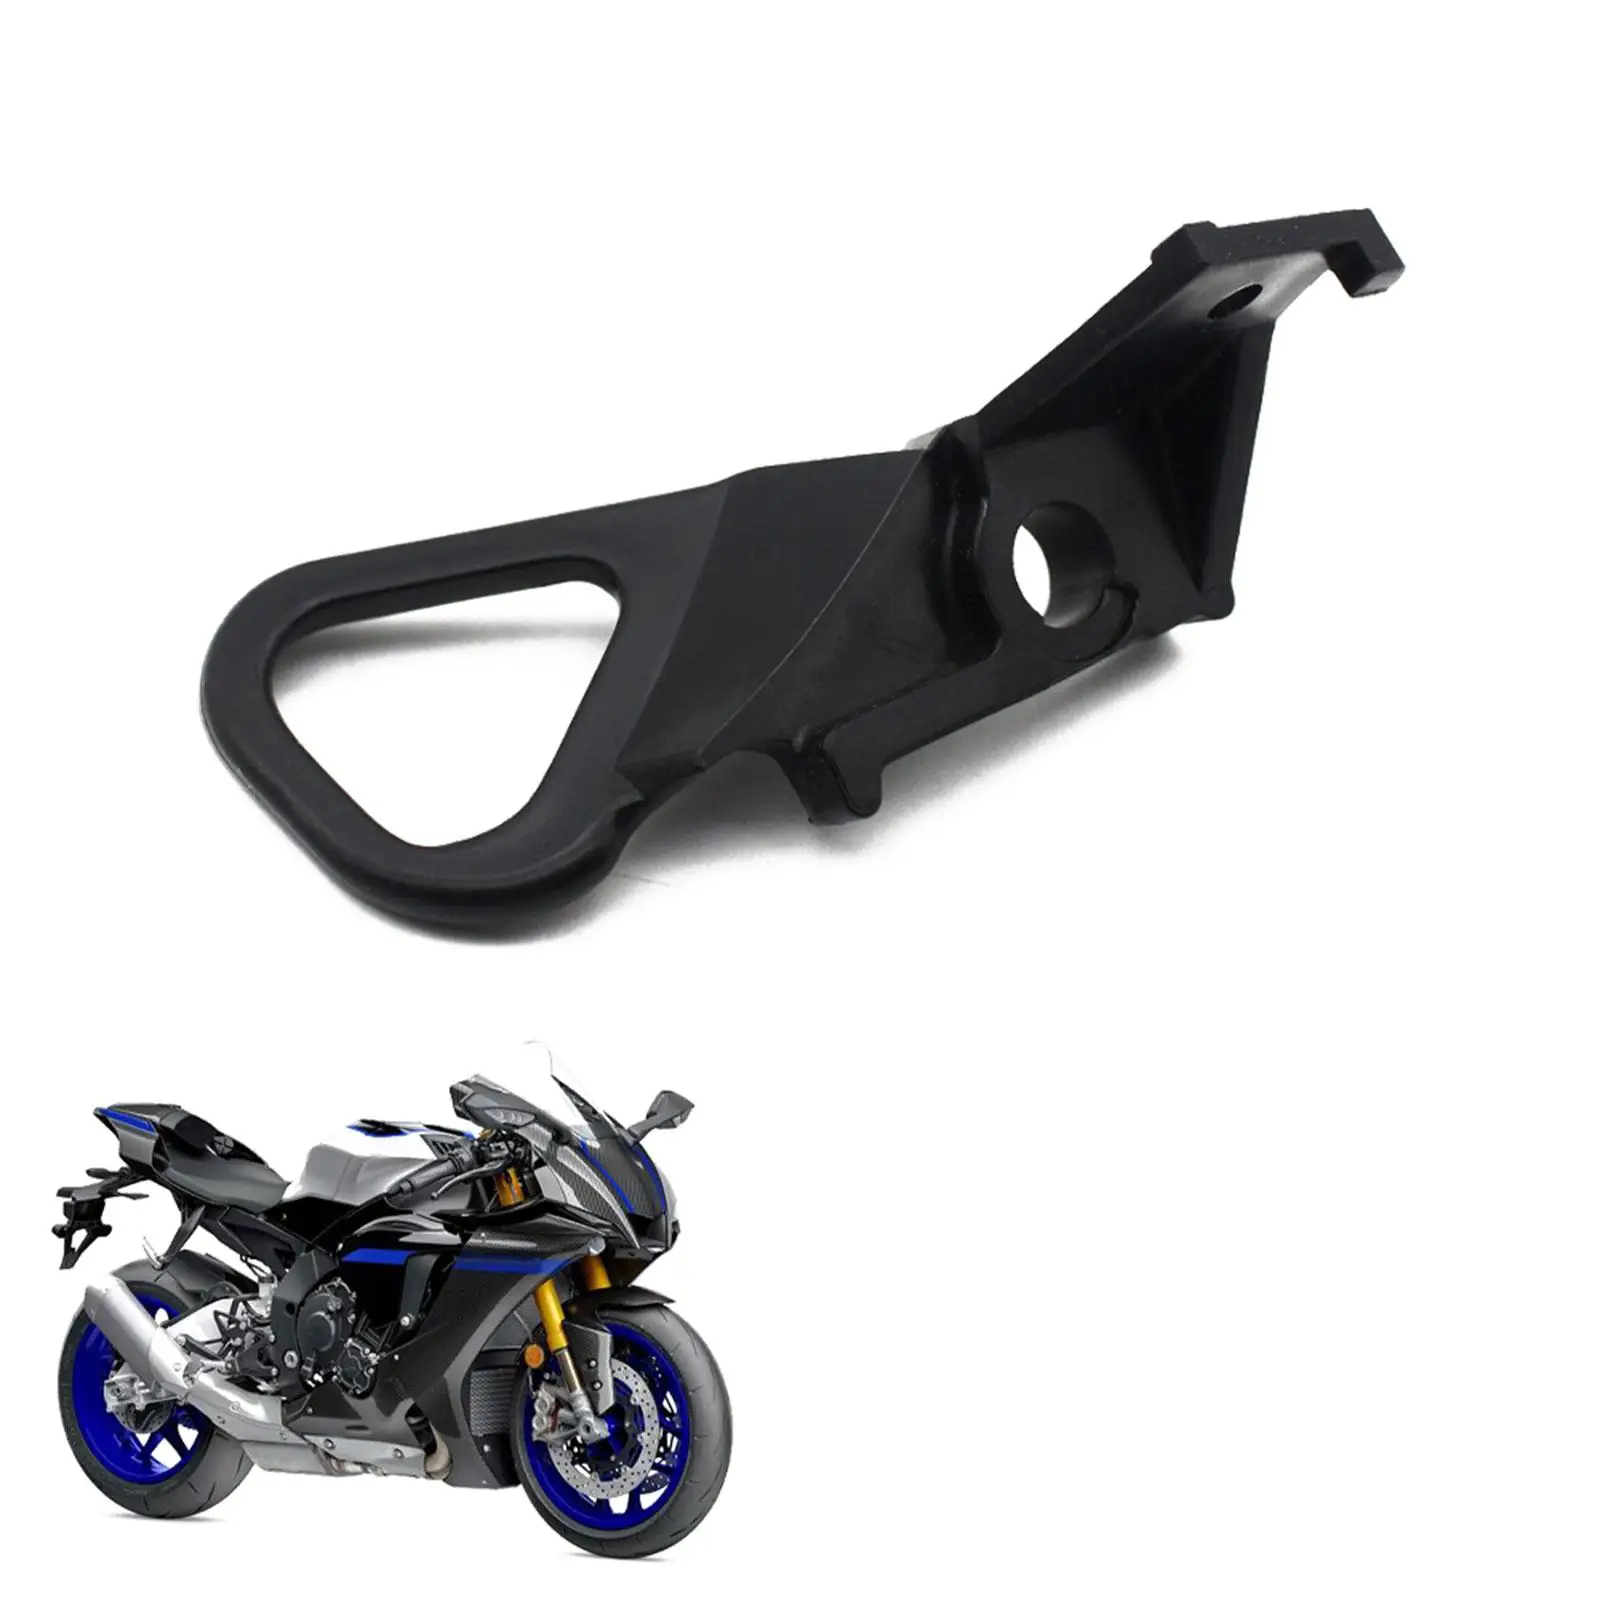 Black Oil Cup Bracket Easy Installation Professional Replacement Aluminum Alloy Oil Cup Bracket for Yamaha Yzf R1 2004-2014